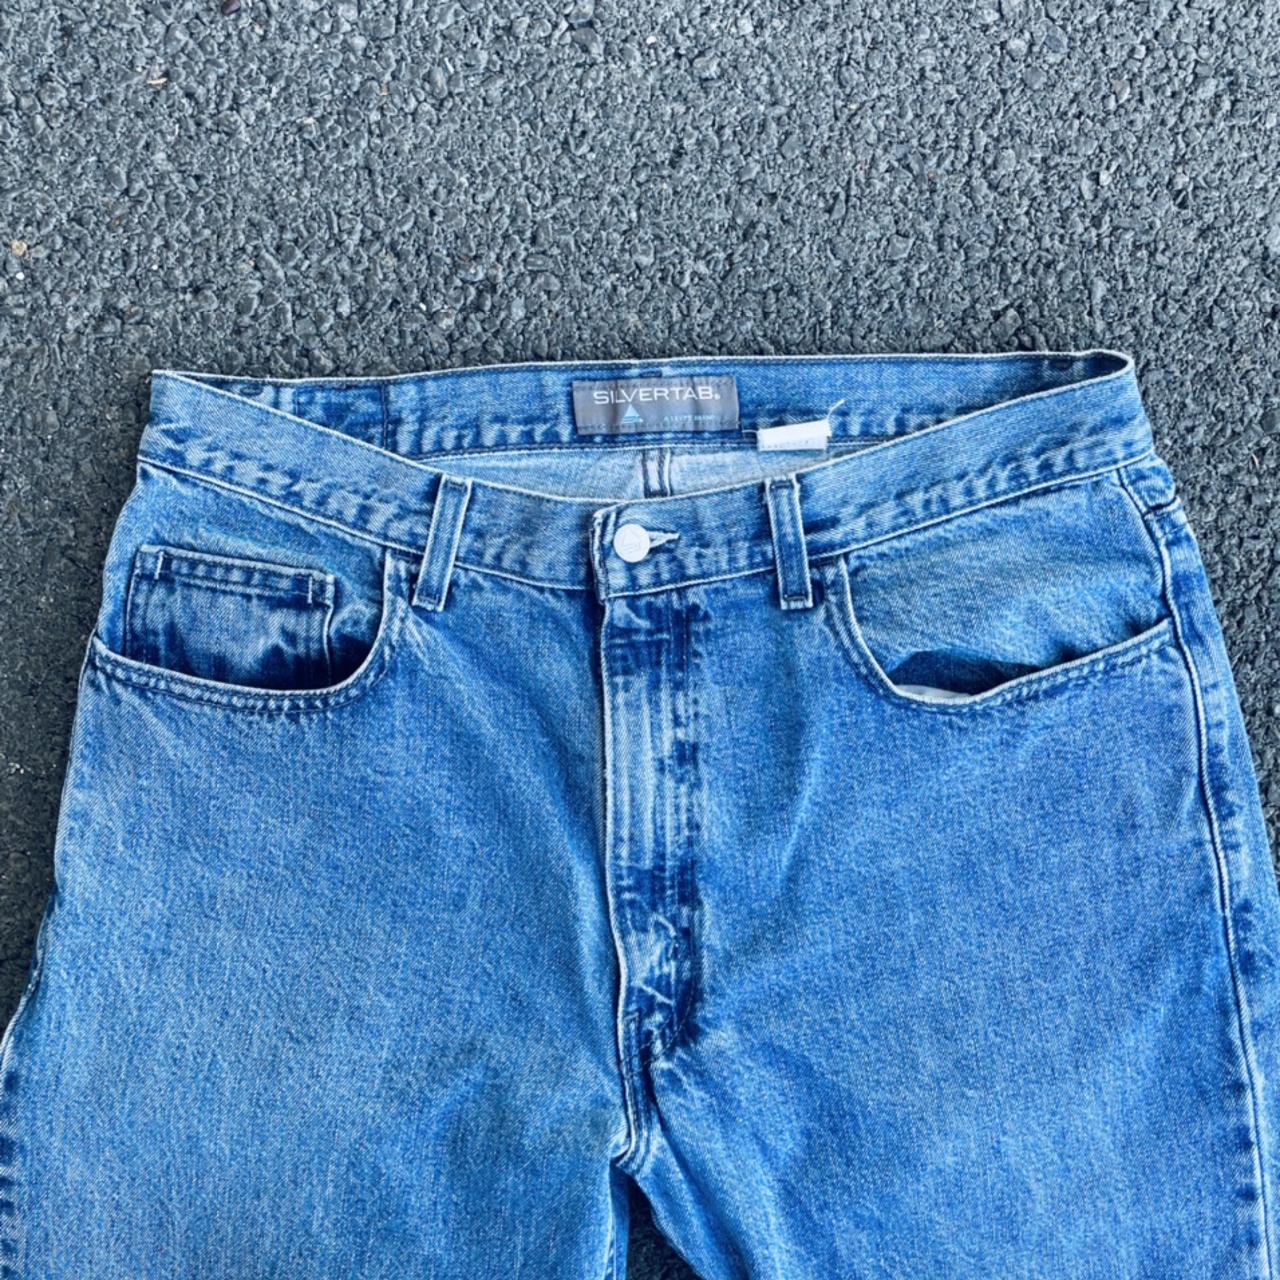 90s LEVIS SILVER TABS GREAT CONDITION SIZE... - Depop